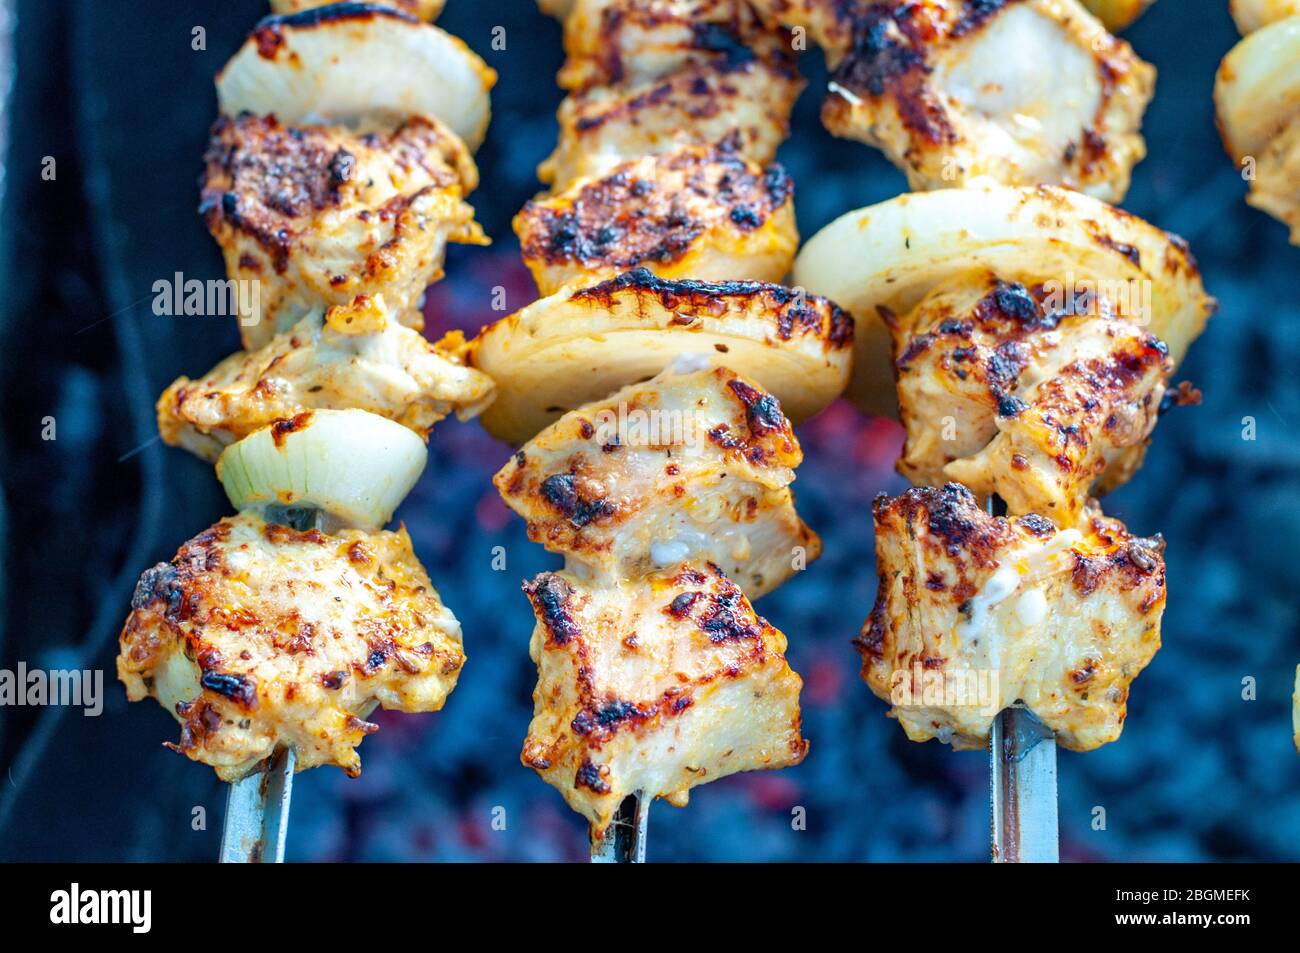 Roasted homemade chicken shish kabobs with fresh onions closeup atop smoldering coals in mangal. Grilled chicken meat skewers on blurred background. Stock Photo